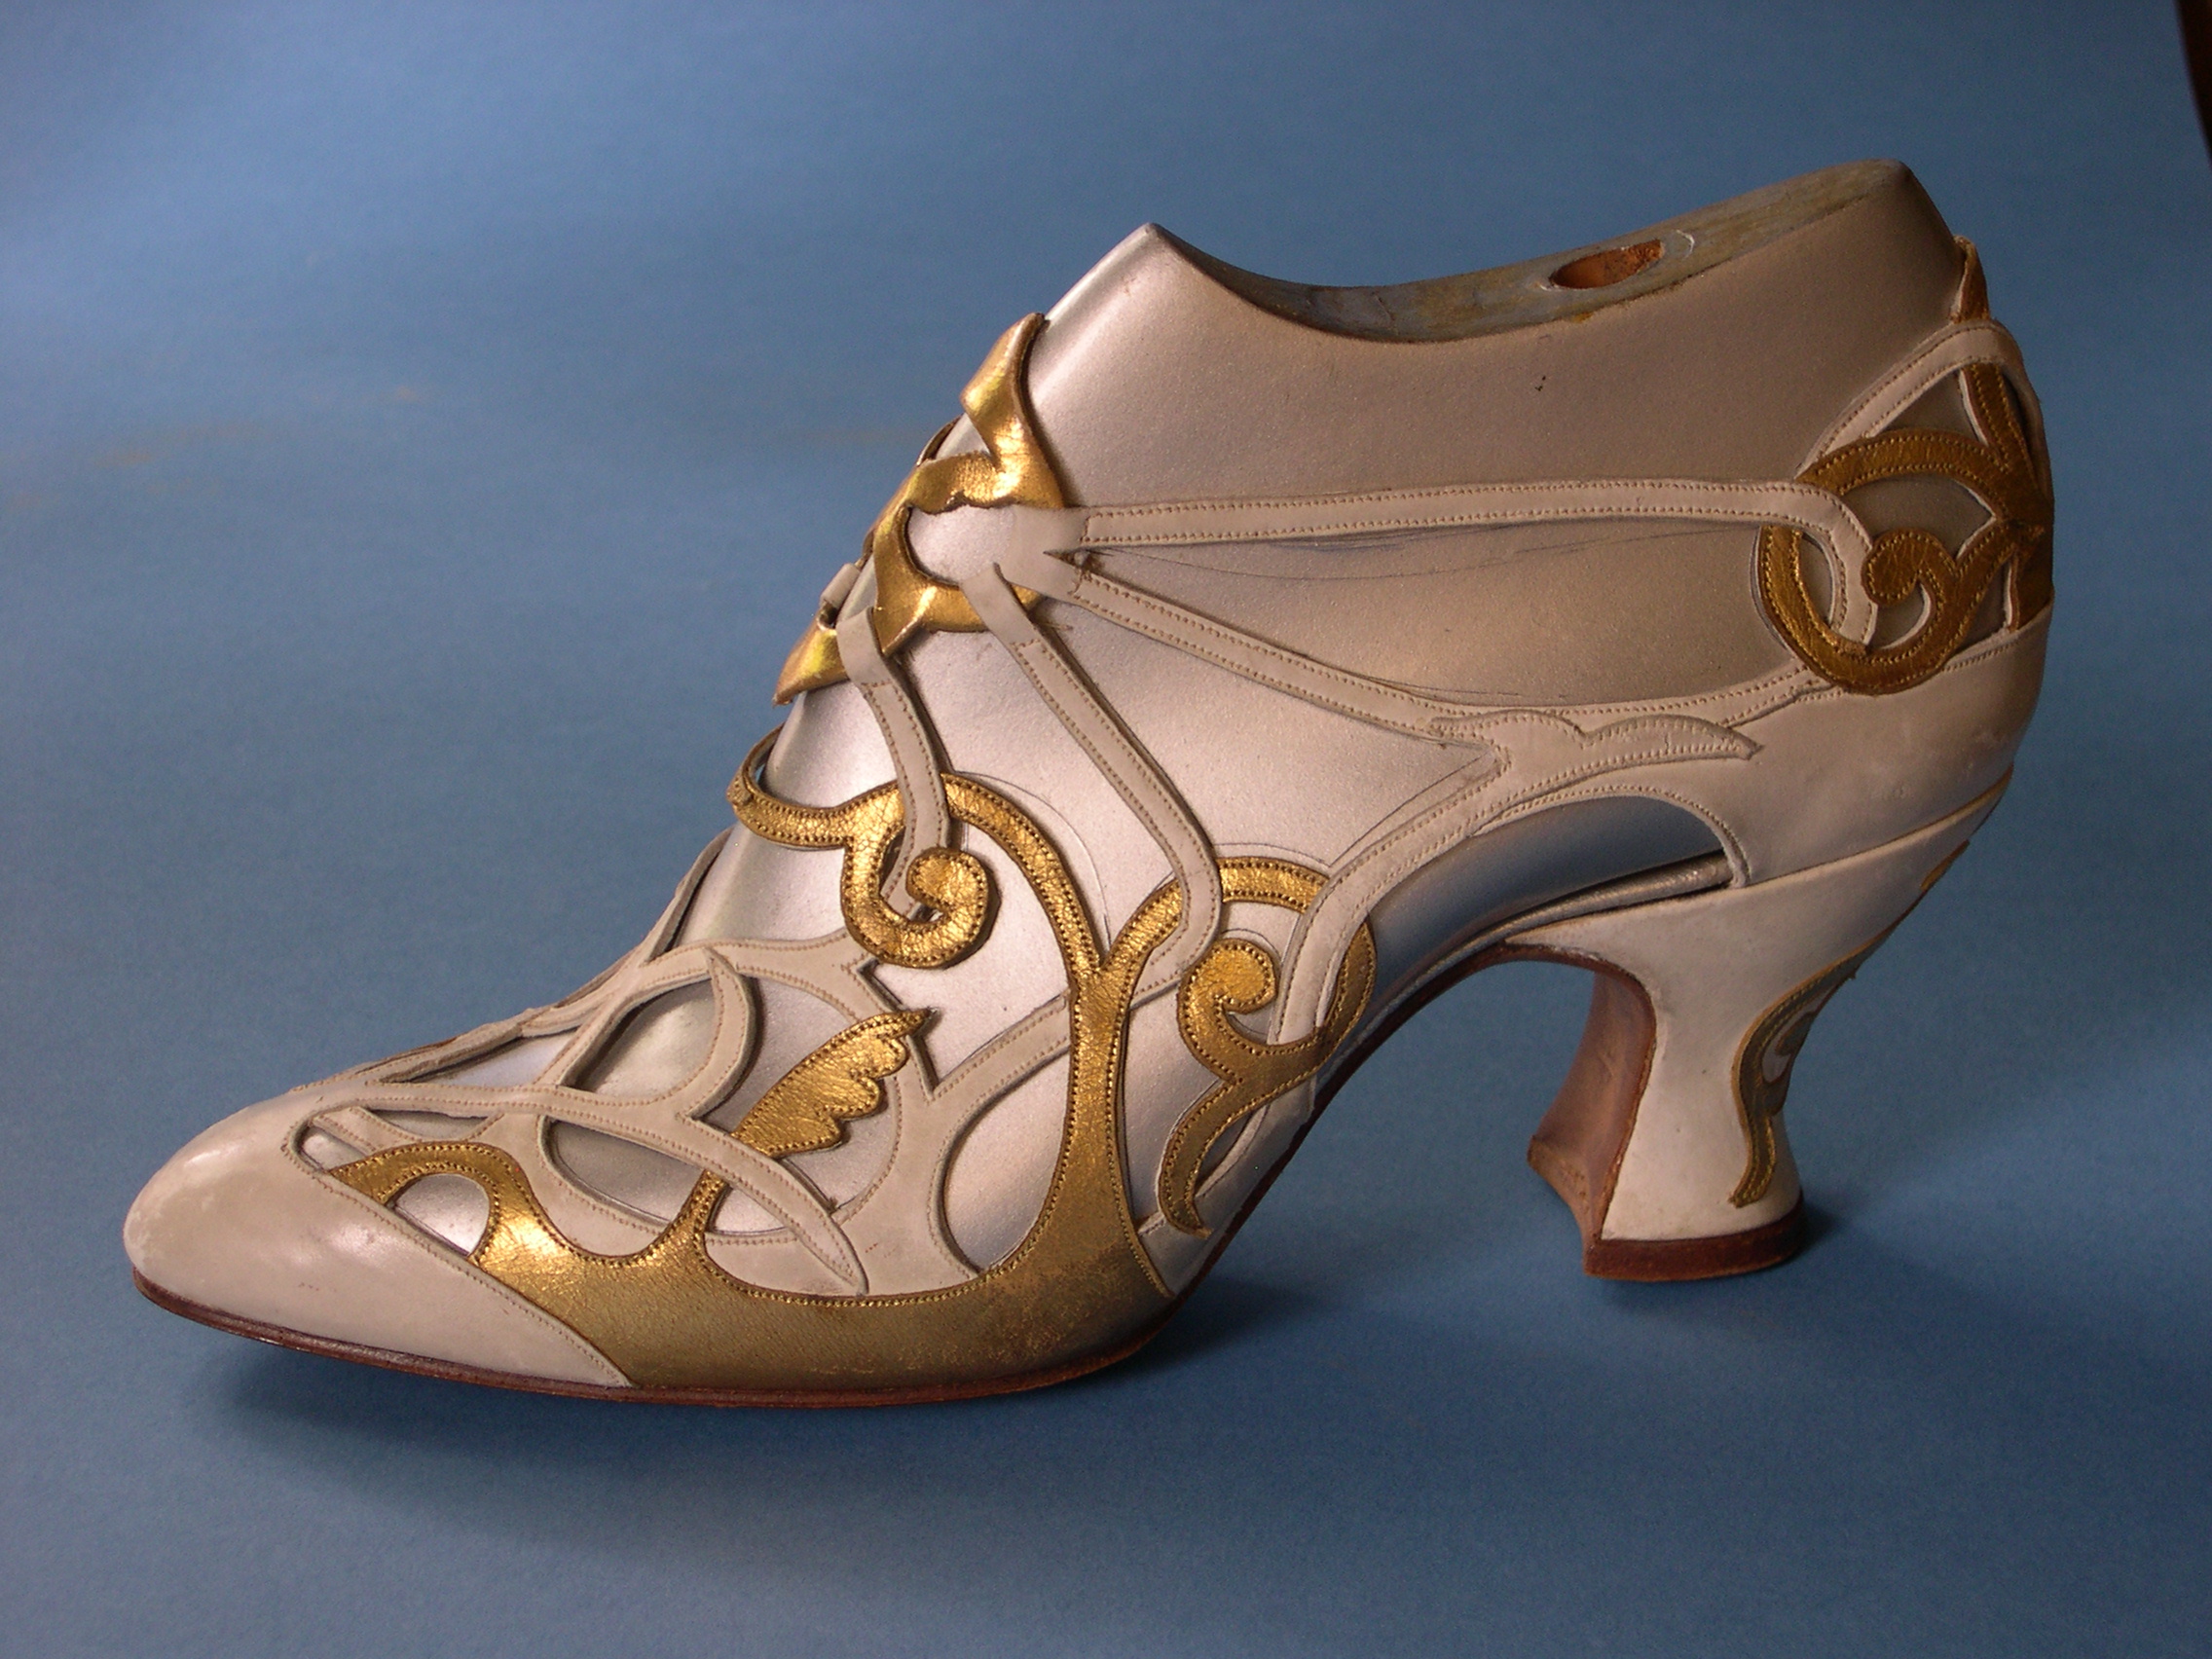 Lady’s shoe, c. 1926-1930 by Claude Robert Wilkinson for Howlett & White Ltd, Norwich. White calf and kid leather, overlaid with gold leaf. 